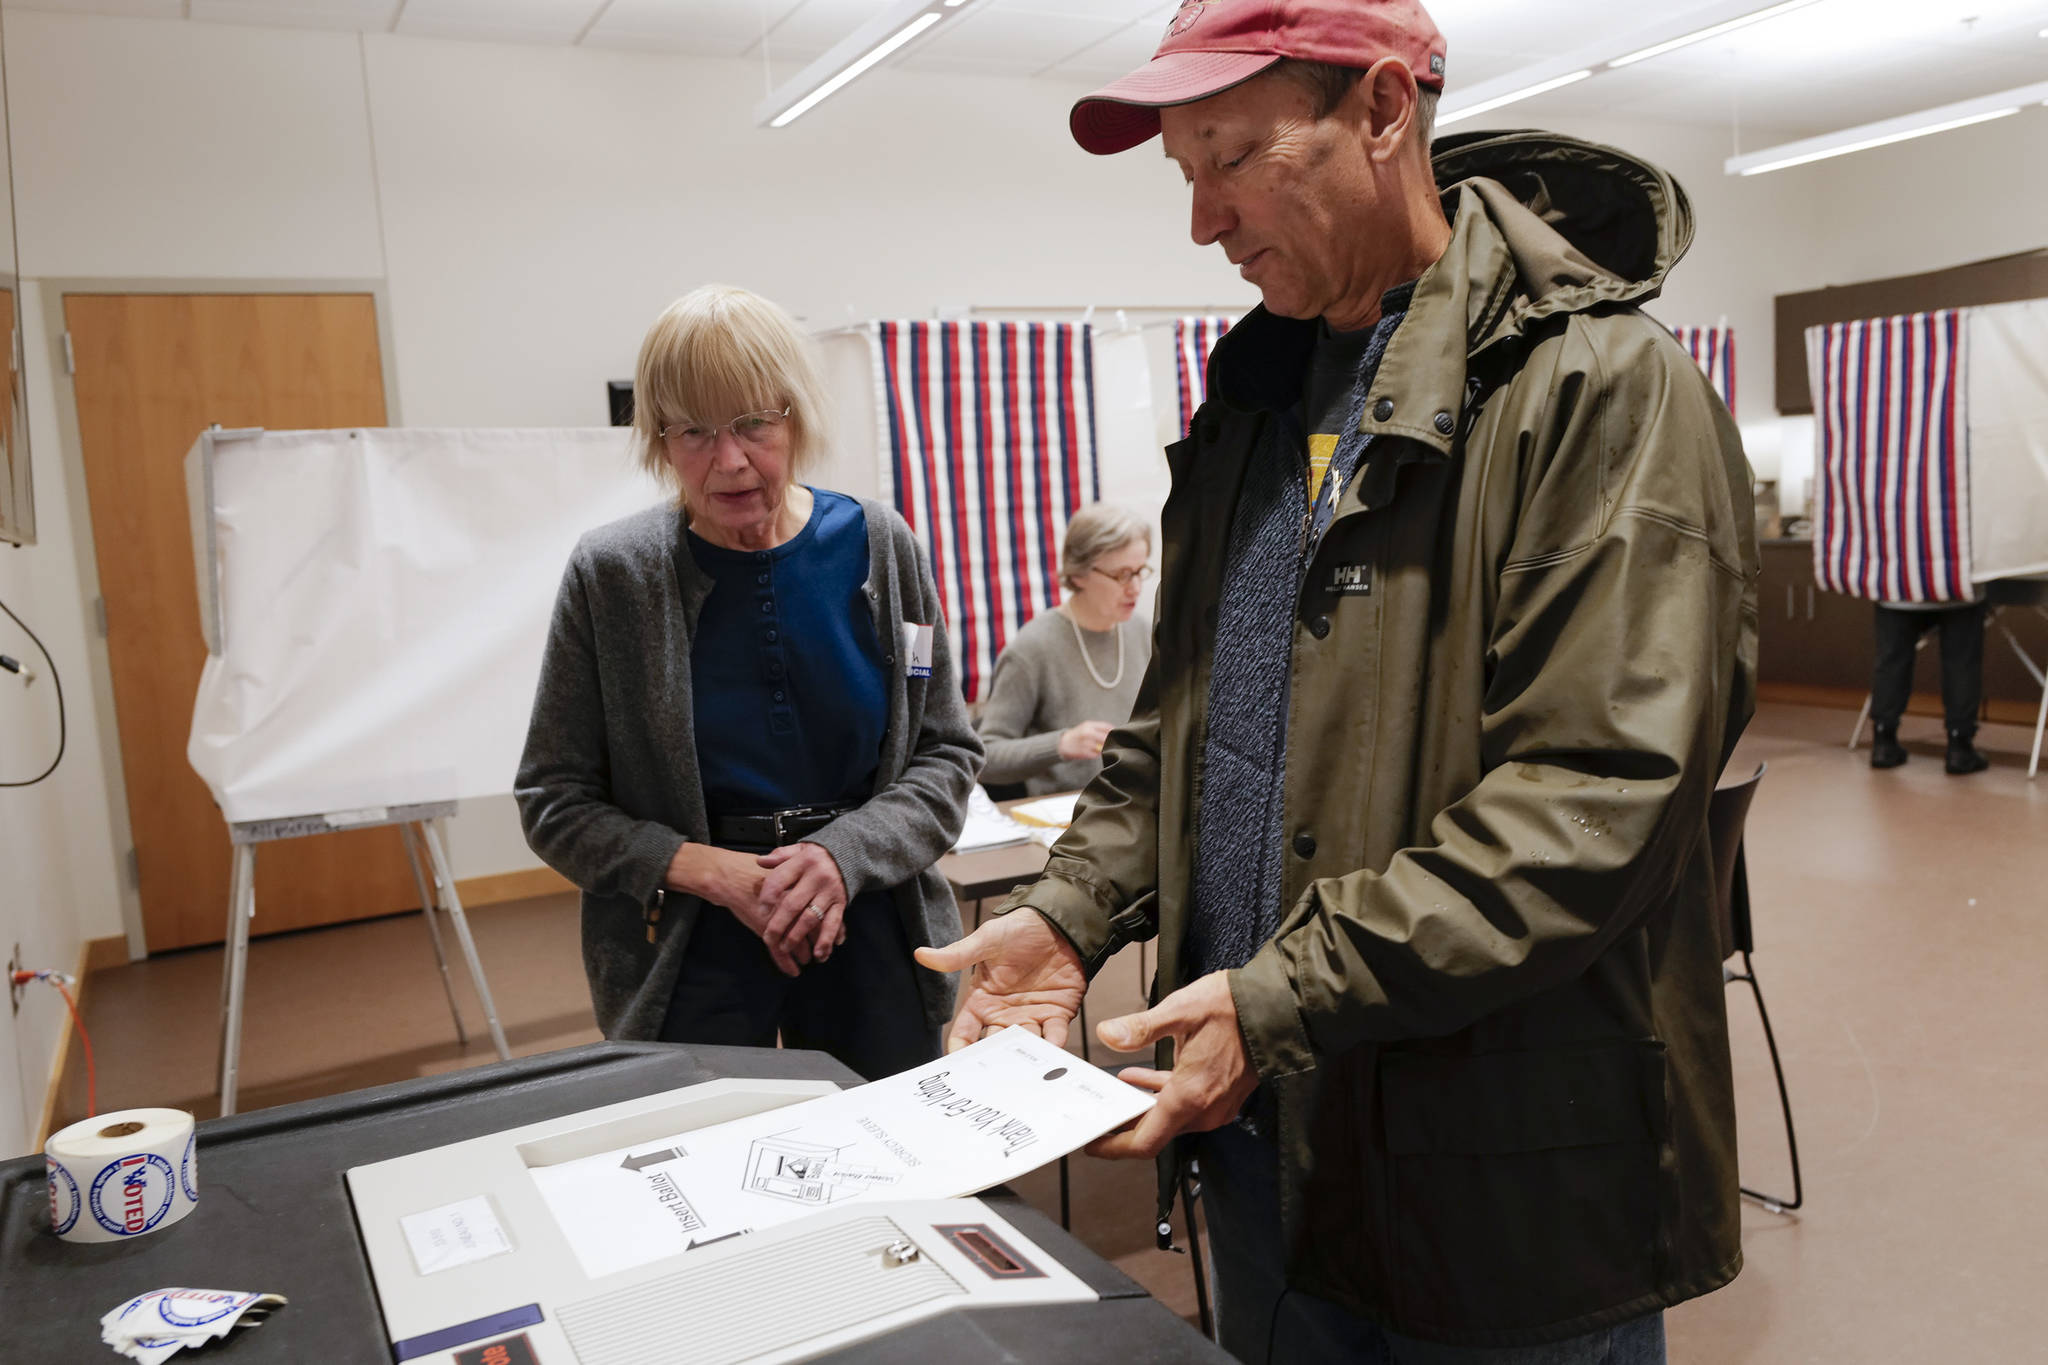 Election official Deborah Behr watches as Doug Woodby enters his ballot into a voting machine at the APK State Library, Archives and Museum Building on Tuesday, Oct. 1, 2019. (Michael Penn | Juneau Empire)